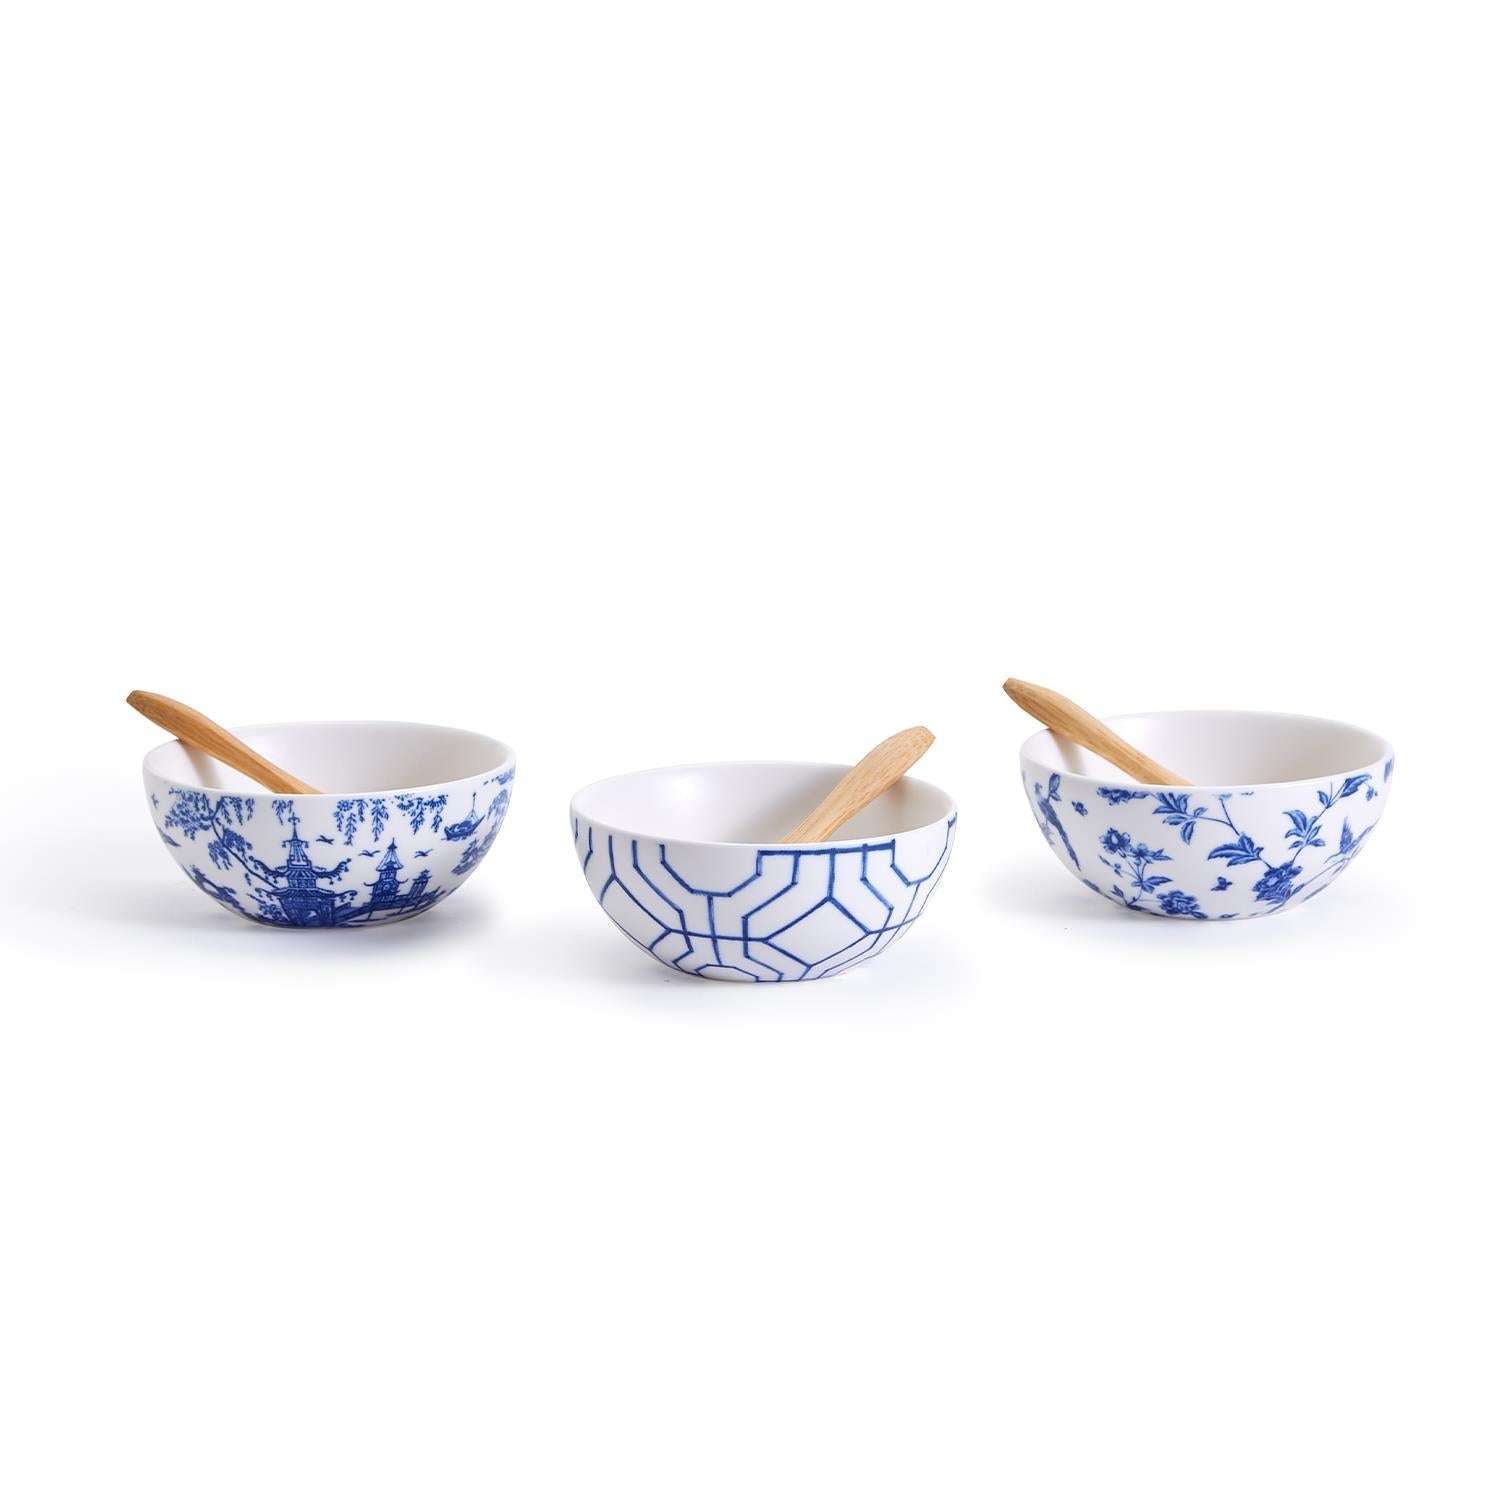 Chinoiserie Tidbit Bowls with Spoon - Nandy's CandyChinoiserie Tidbit Bowls with Spoon